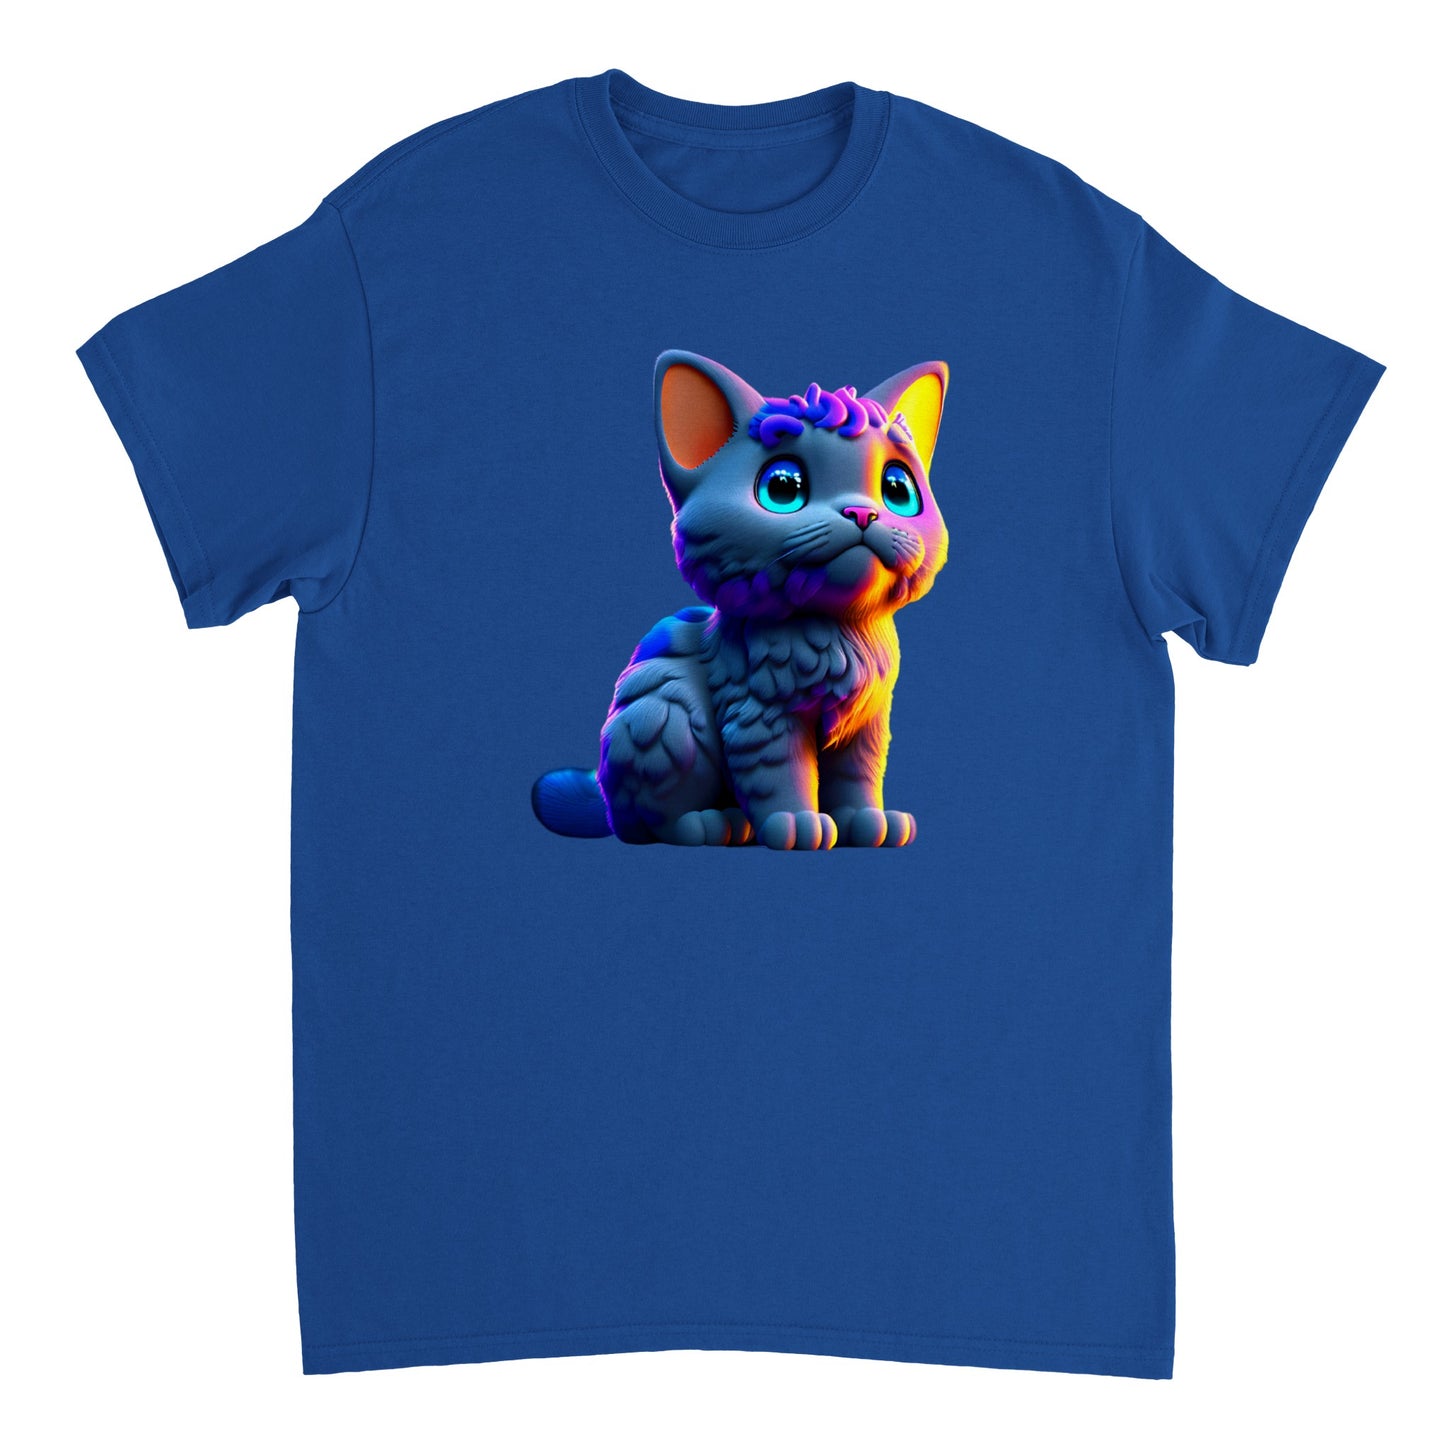 Adorable, Cool, Cute Cats and Kittens Toy - Heavyweight Unisex Crewneck T-shirt 21